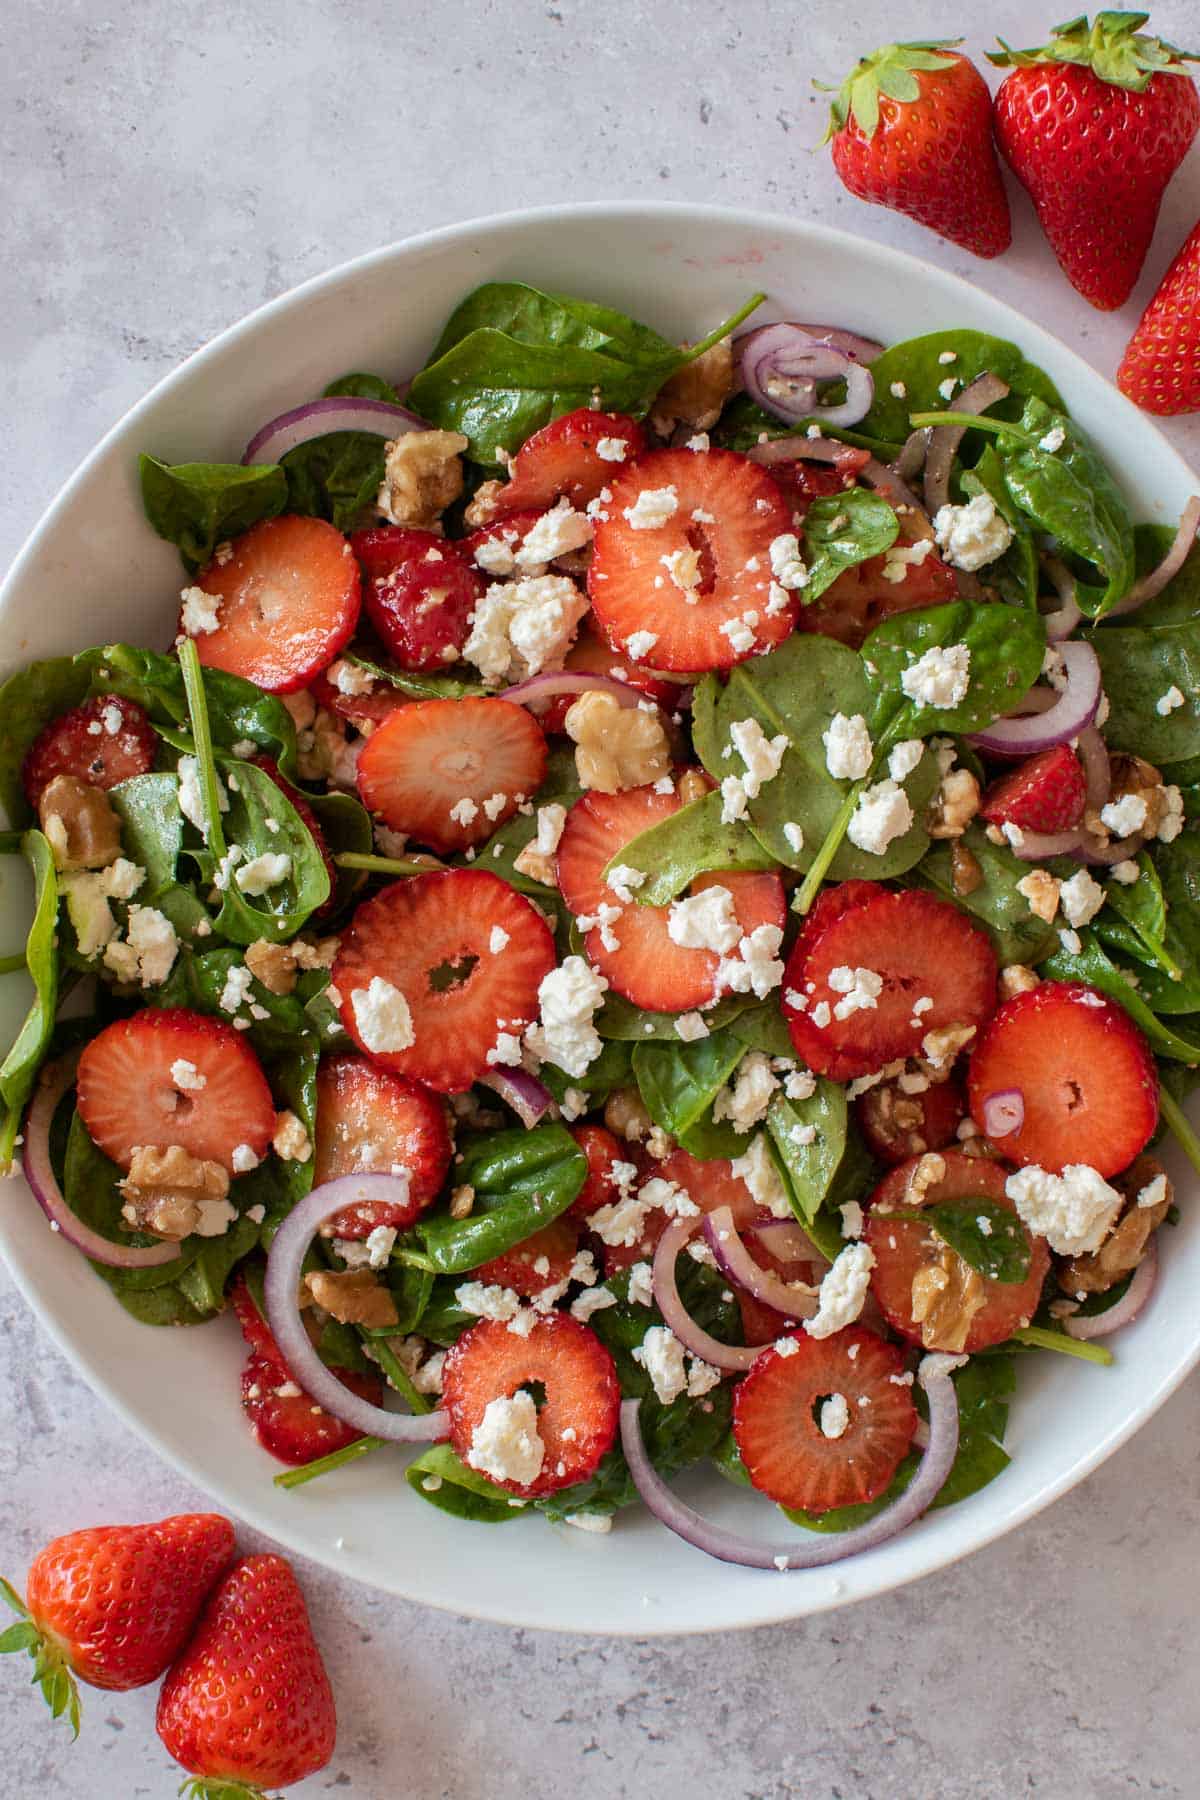 A plate of mixed strawberry and walnut salad with feta cheese and spinach. Strawberries are scattered on the side.